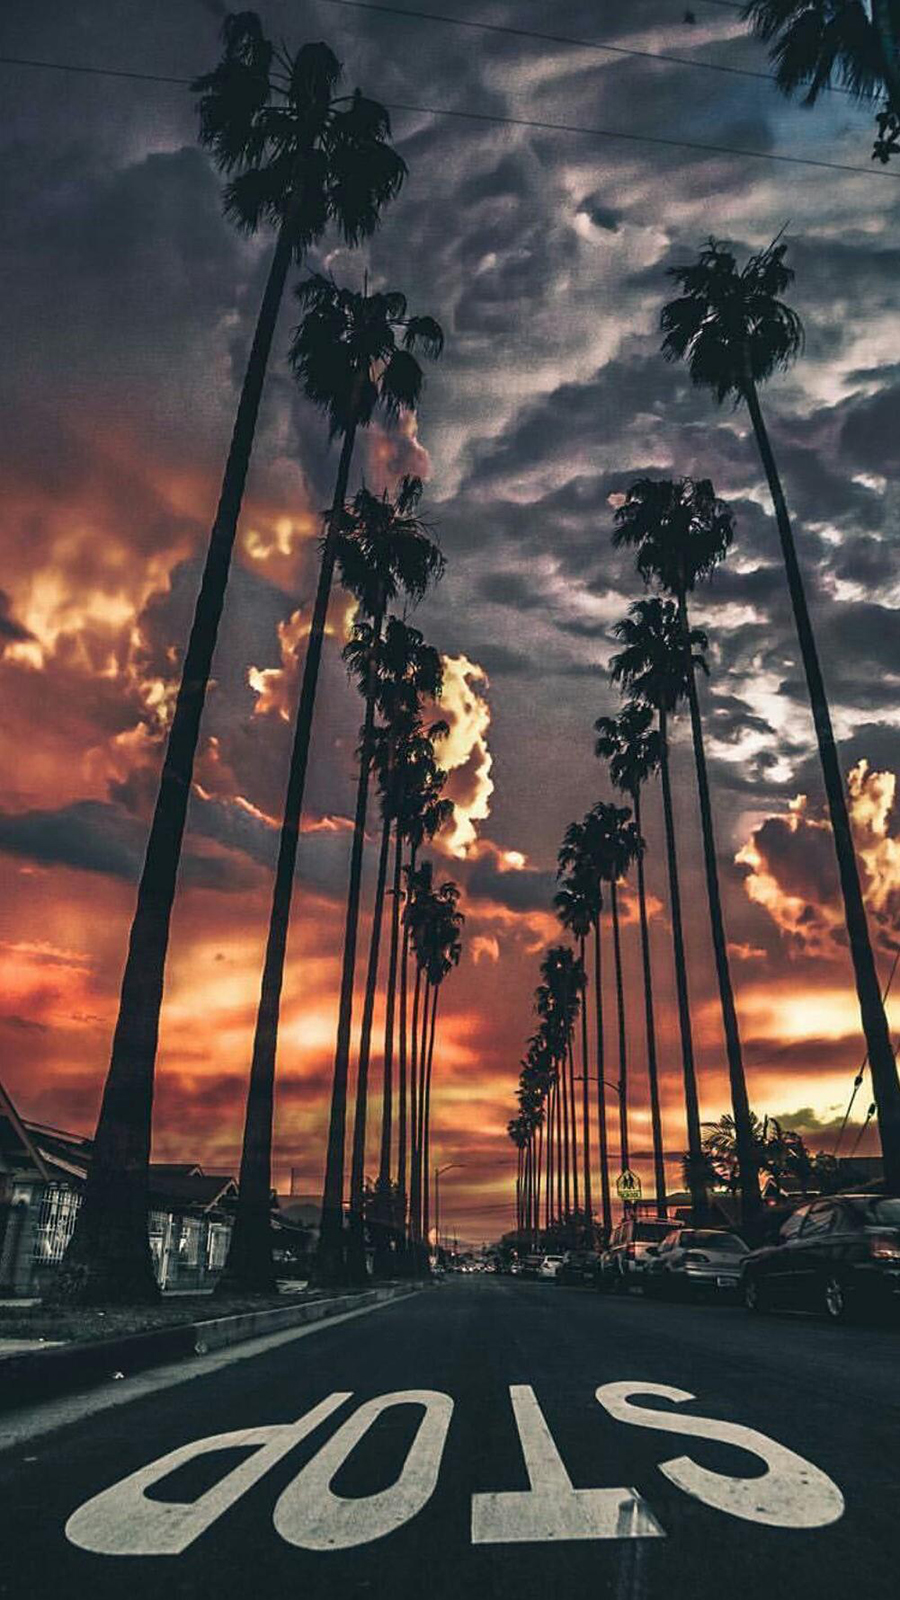 California Palm Trees iPhone Wallpapers on WallpaperDog